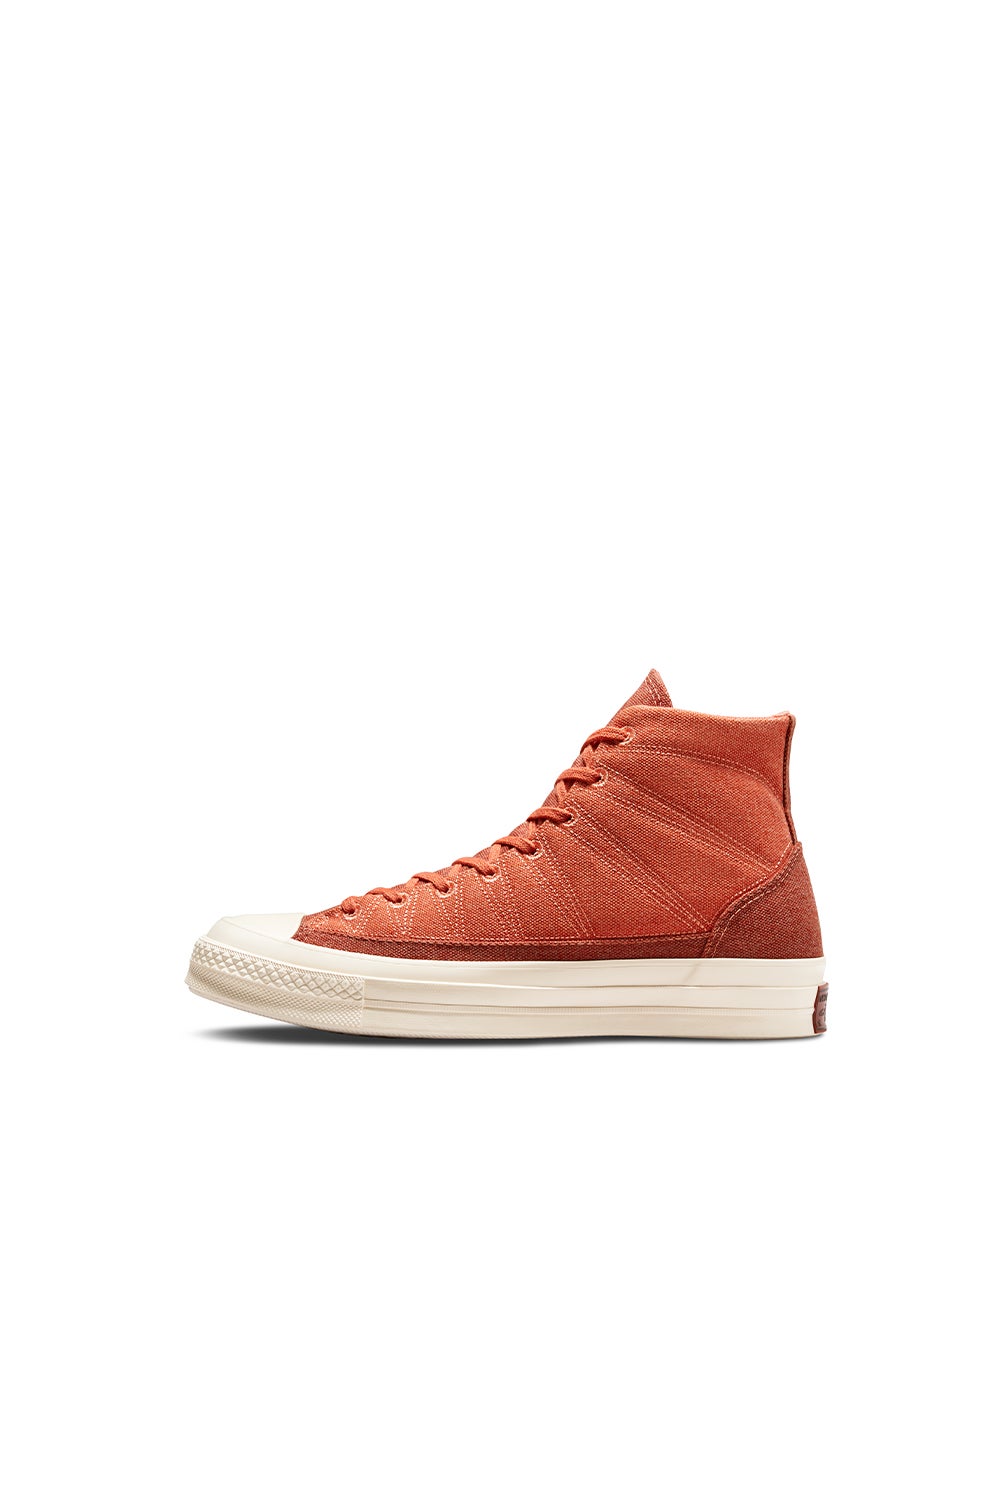 Converse Chuck 70 Hiking Stitched Canvas High Top Fire Opal